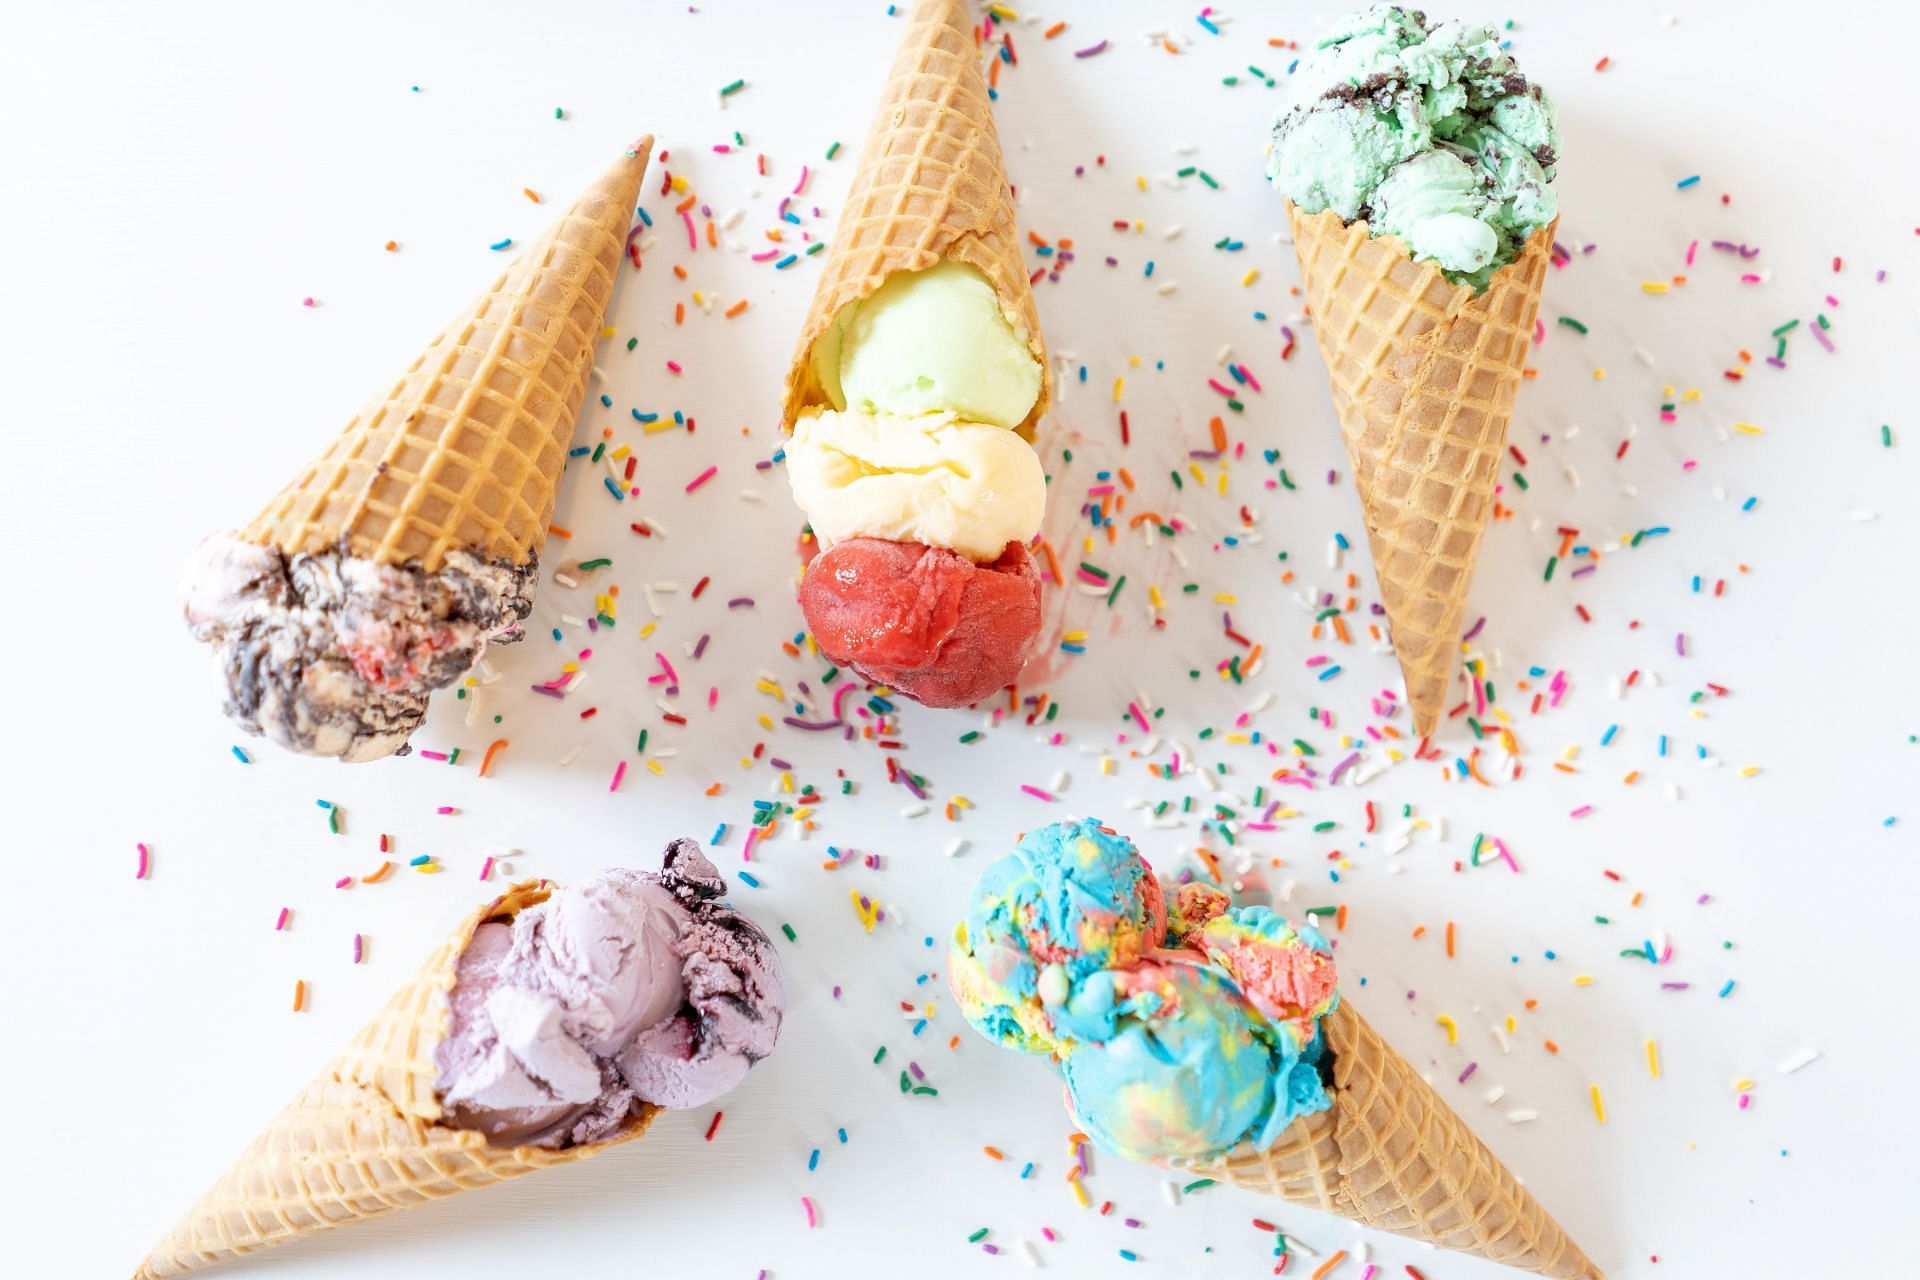 Cold Stone calories: Ice cream contains added sugar. (Image via Unsplash/Courtney Cook)